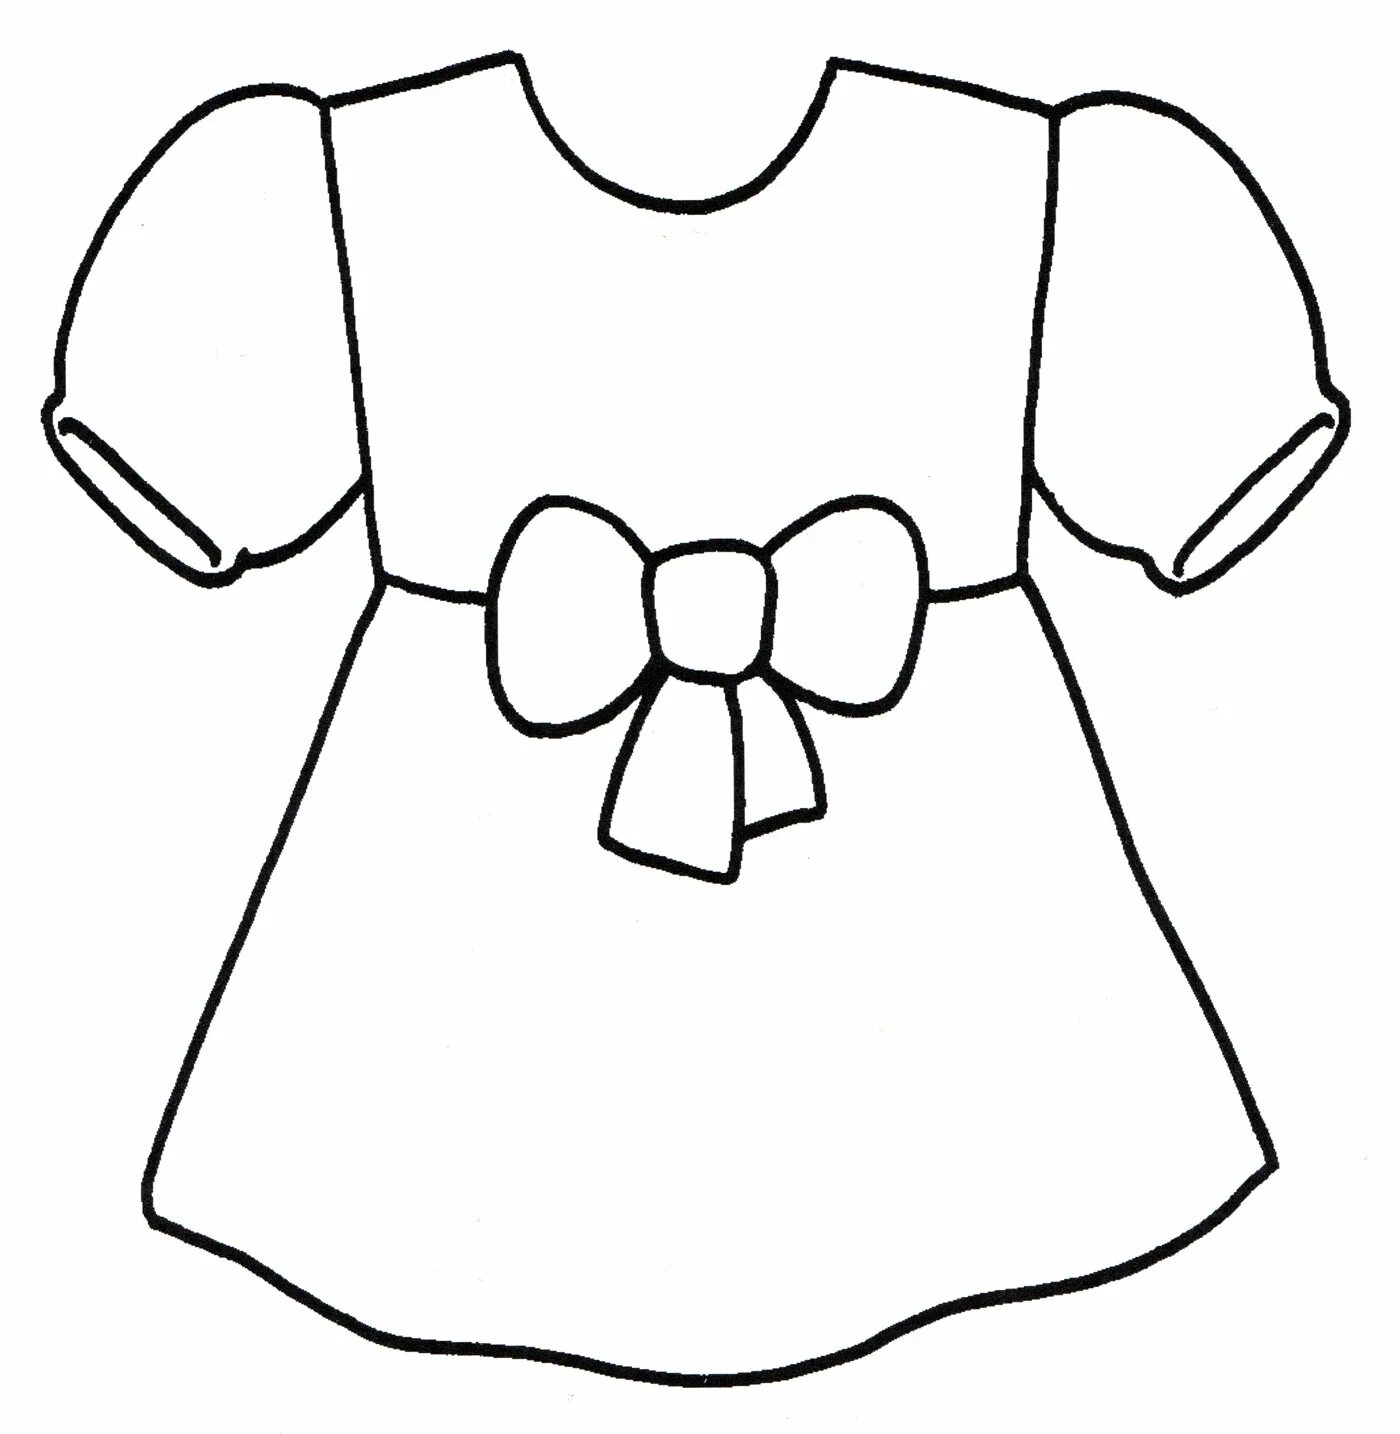 Flower dress coloring page for children 2-3 years old